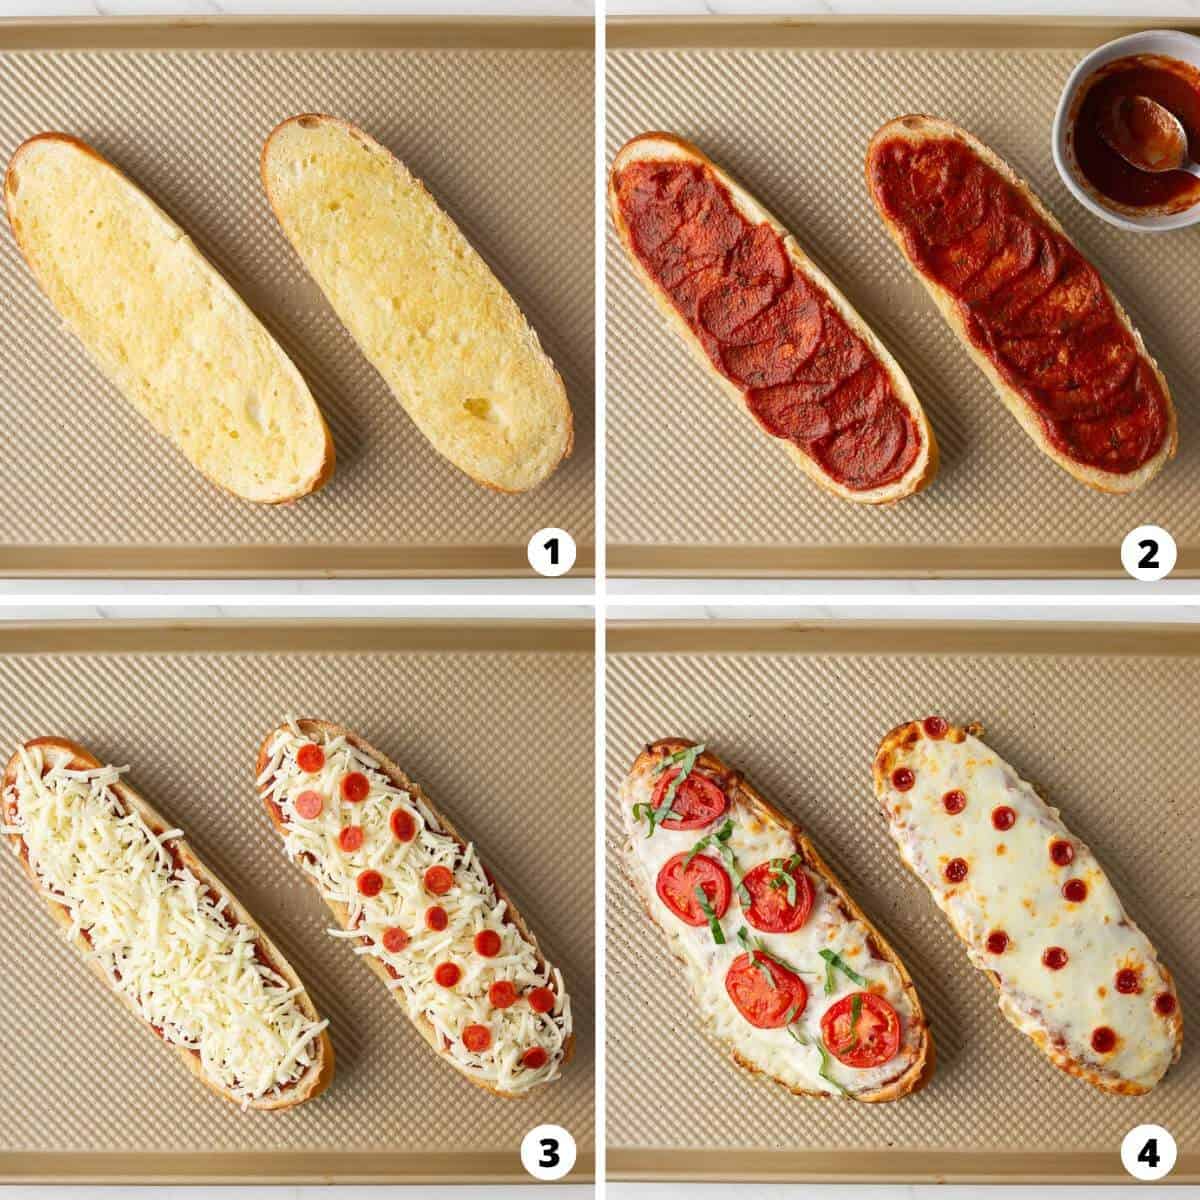 Showing how to make french bread pizza in a 4 step collage.